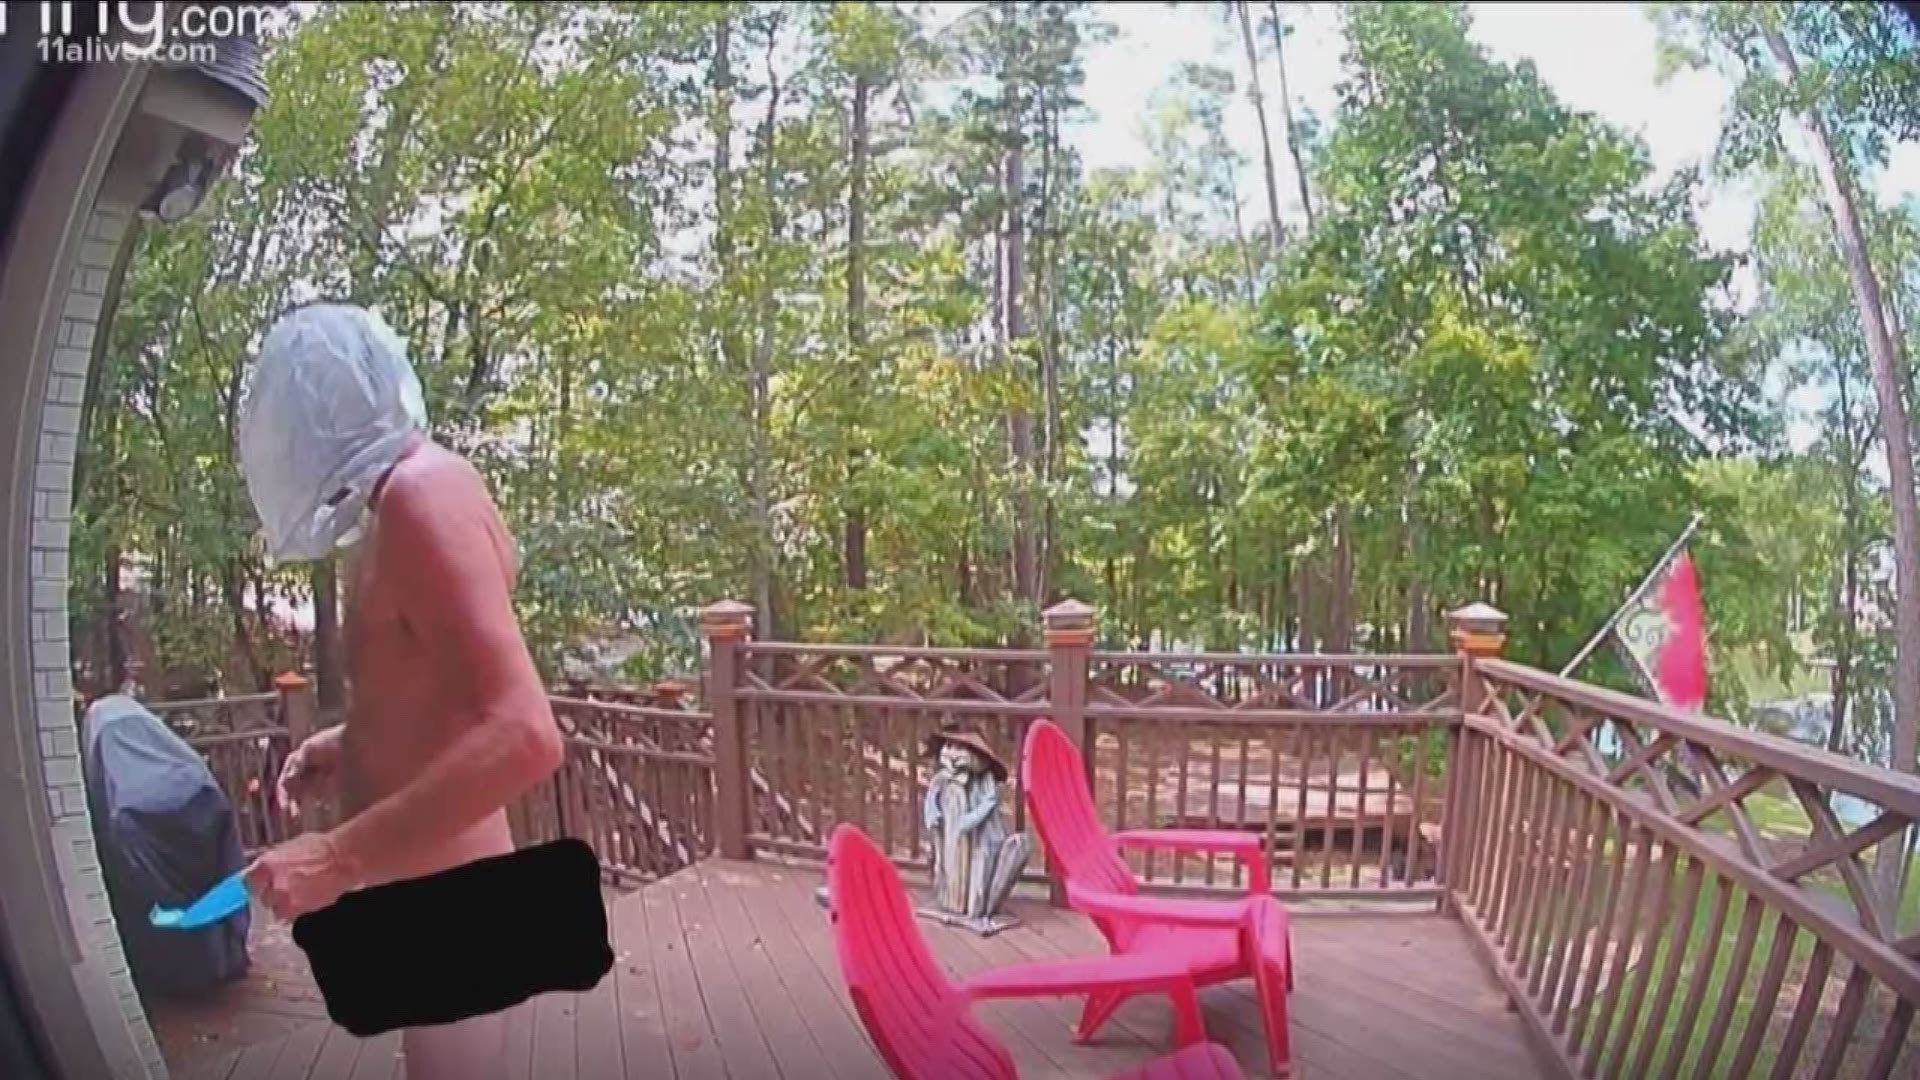 Naked Man With Bag Over Head Caught On Camera Using Someones Outdoor